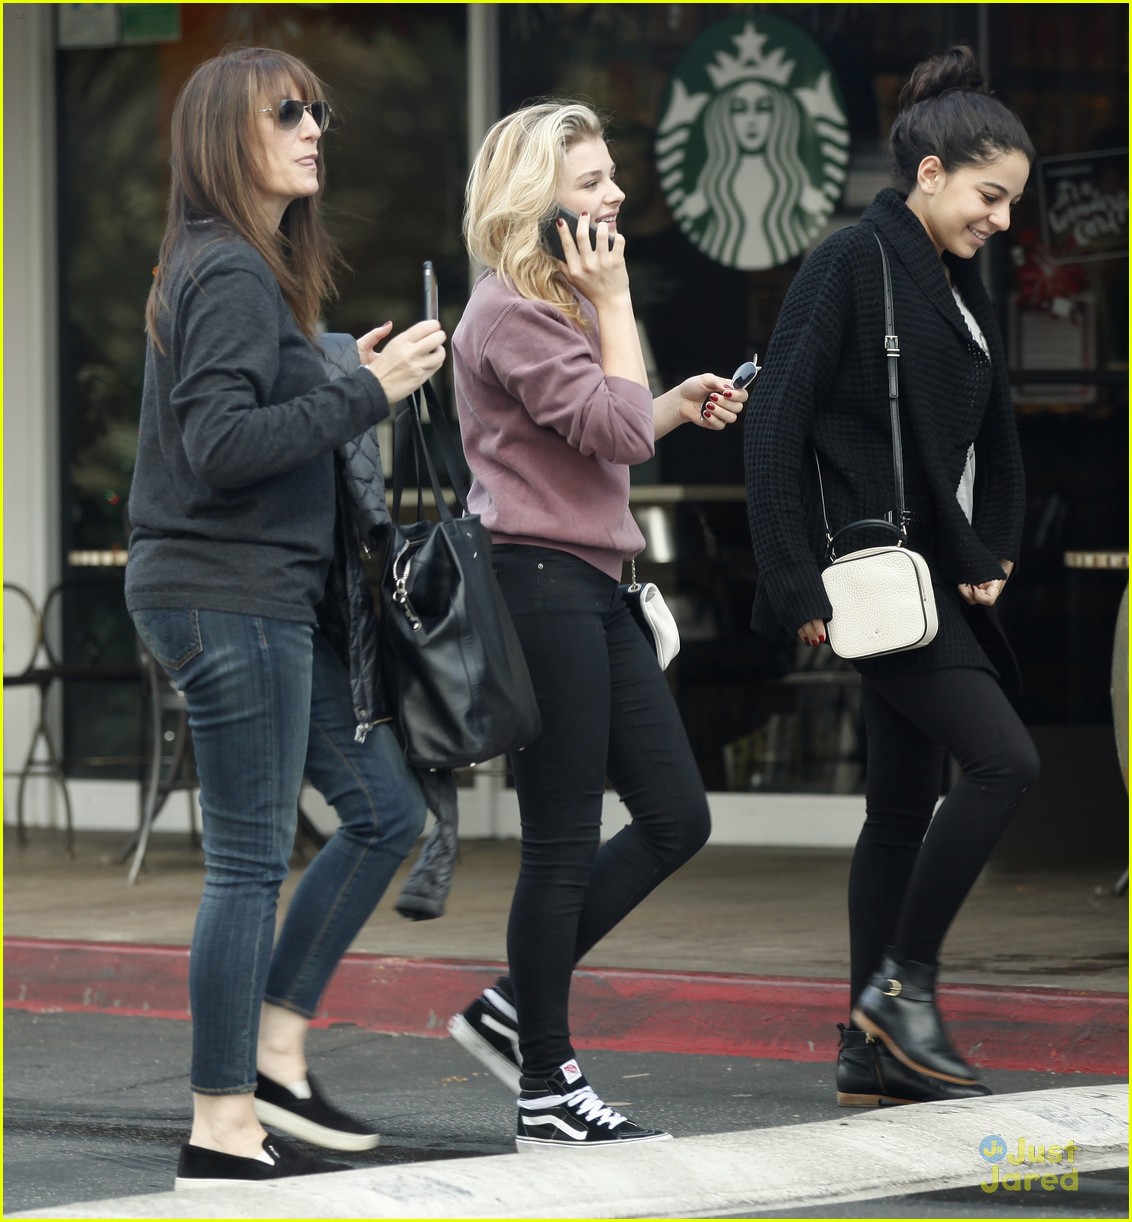 Chloe Moretz Ditches Her Knee Brace For Girl's Day Out: Photo 756740, Chloe Moretz Pictures